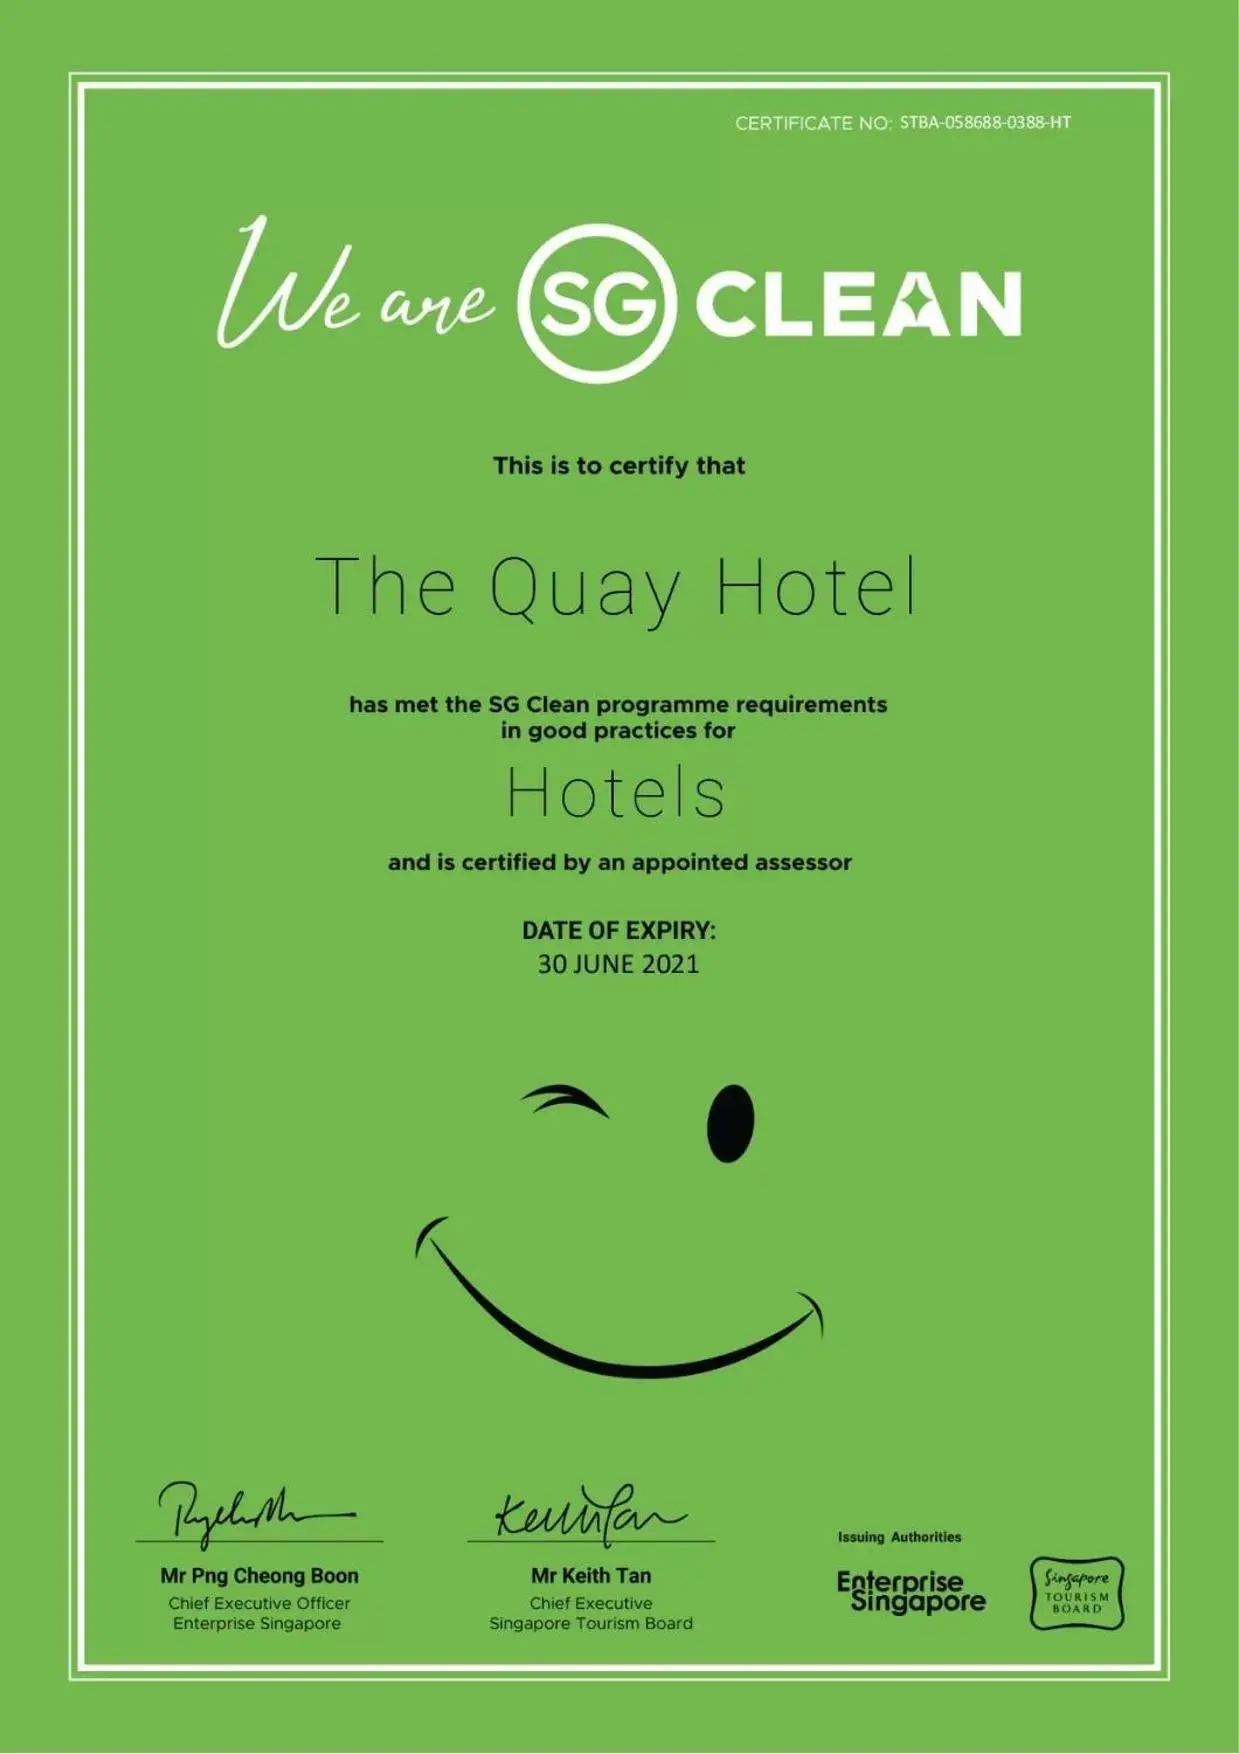 Logo/Certificate/Sign in The Quay Hotel